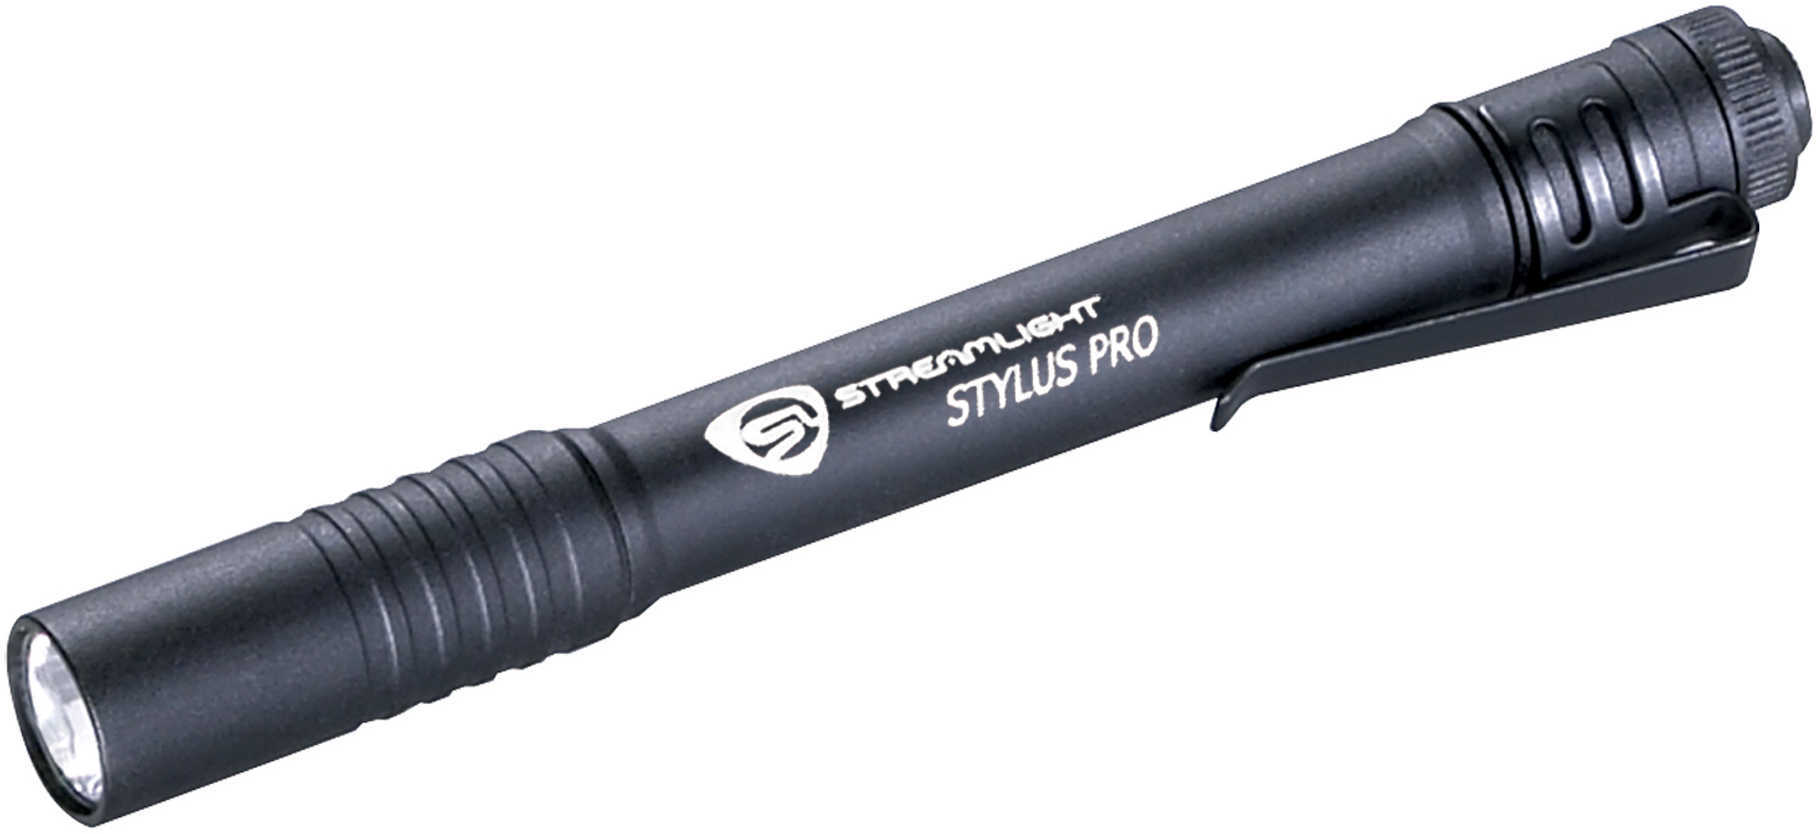 Streamlight Shock Proof Black Pen Light With 24 Lumens/Includes 2 AAA Batteries Md: 66118